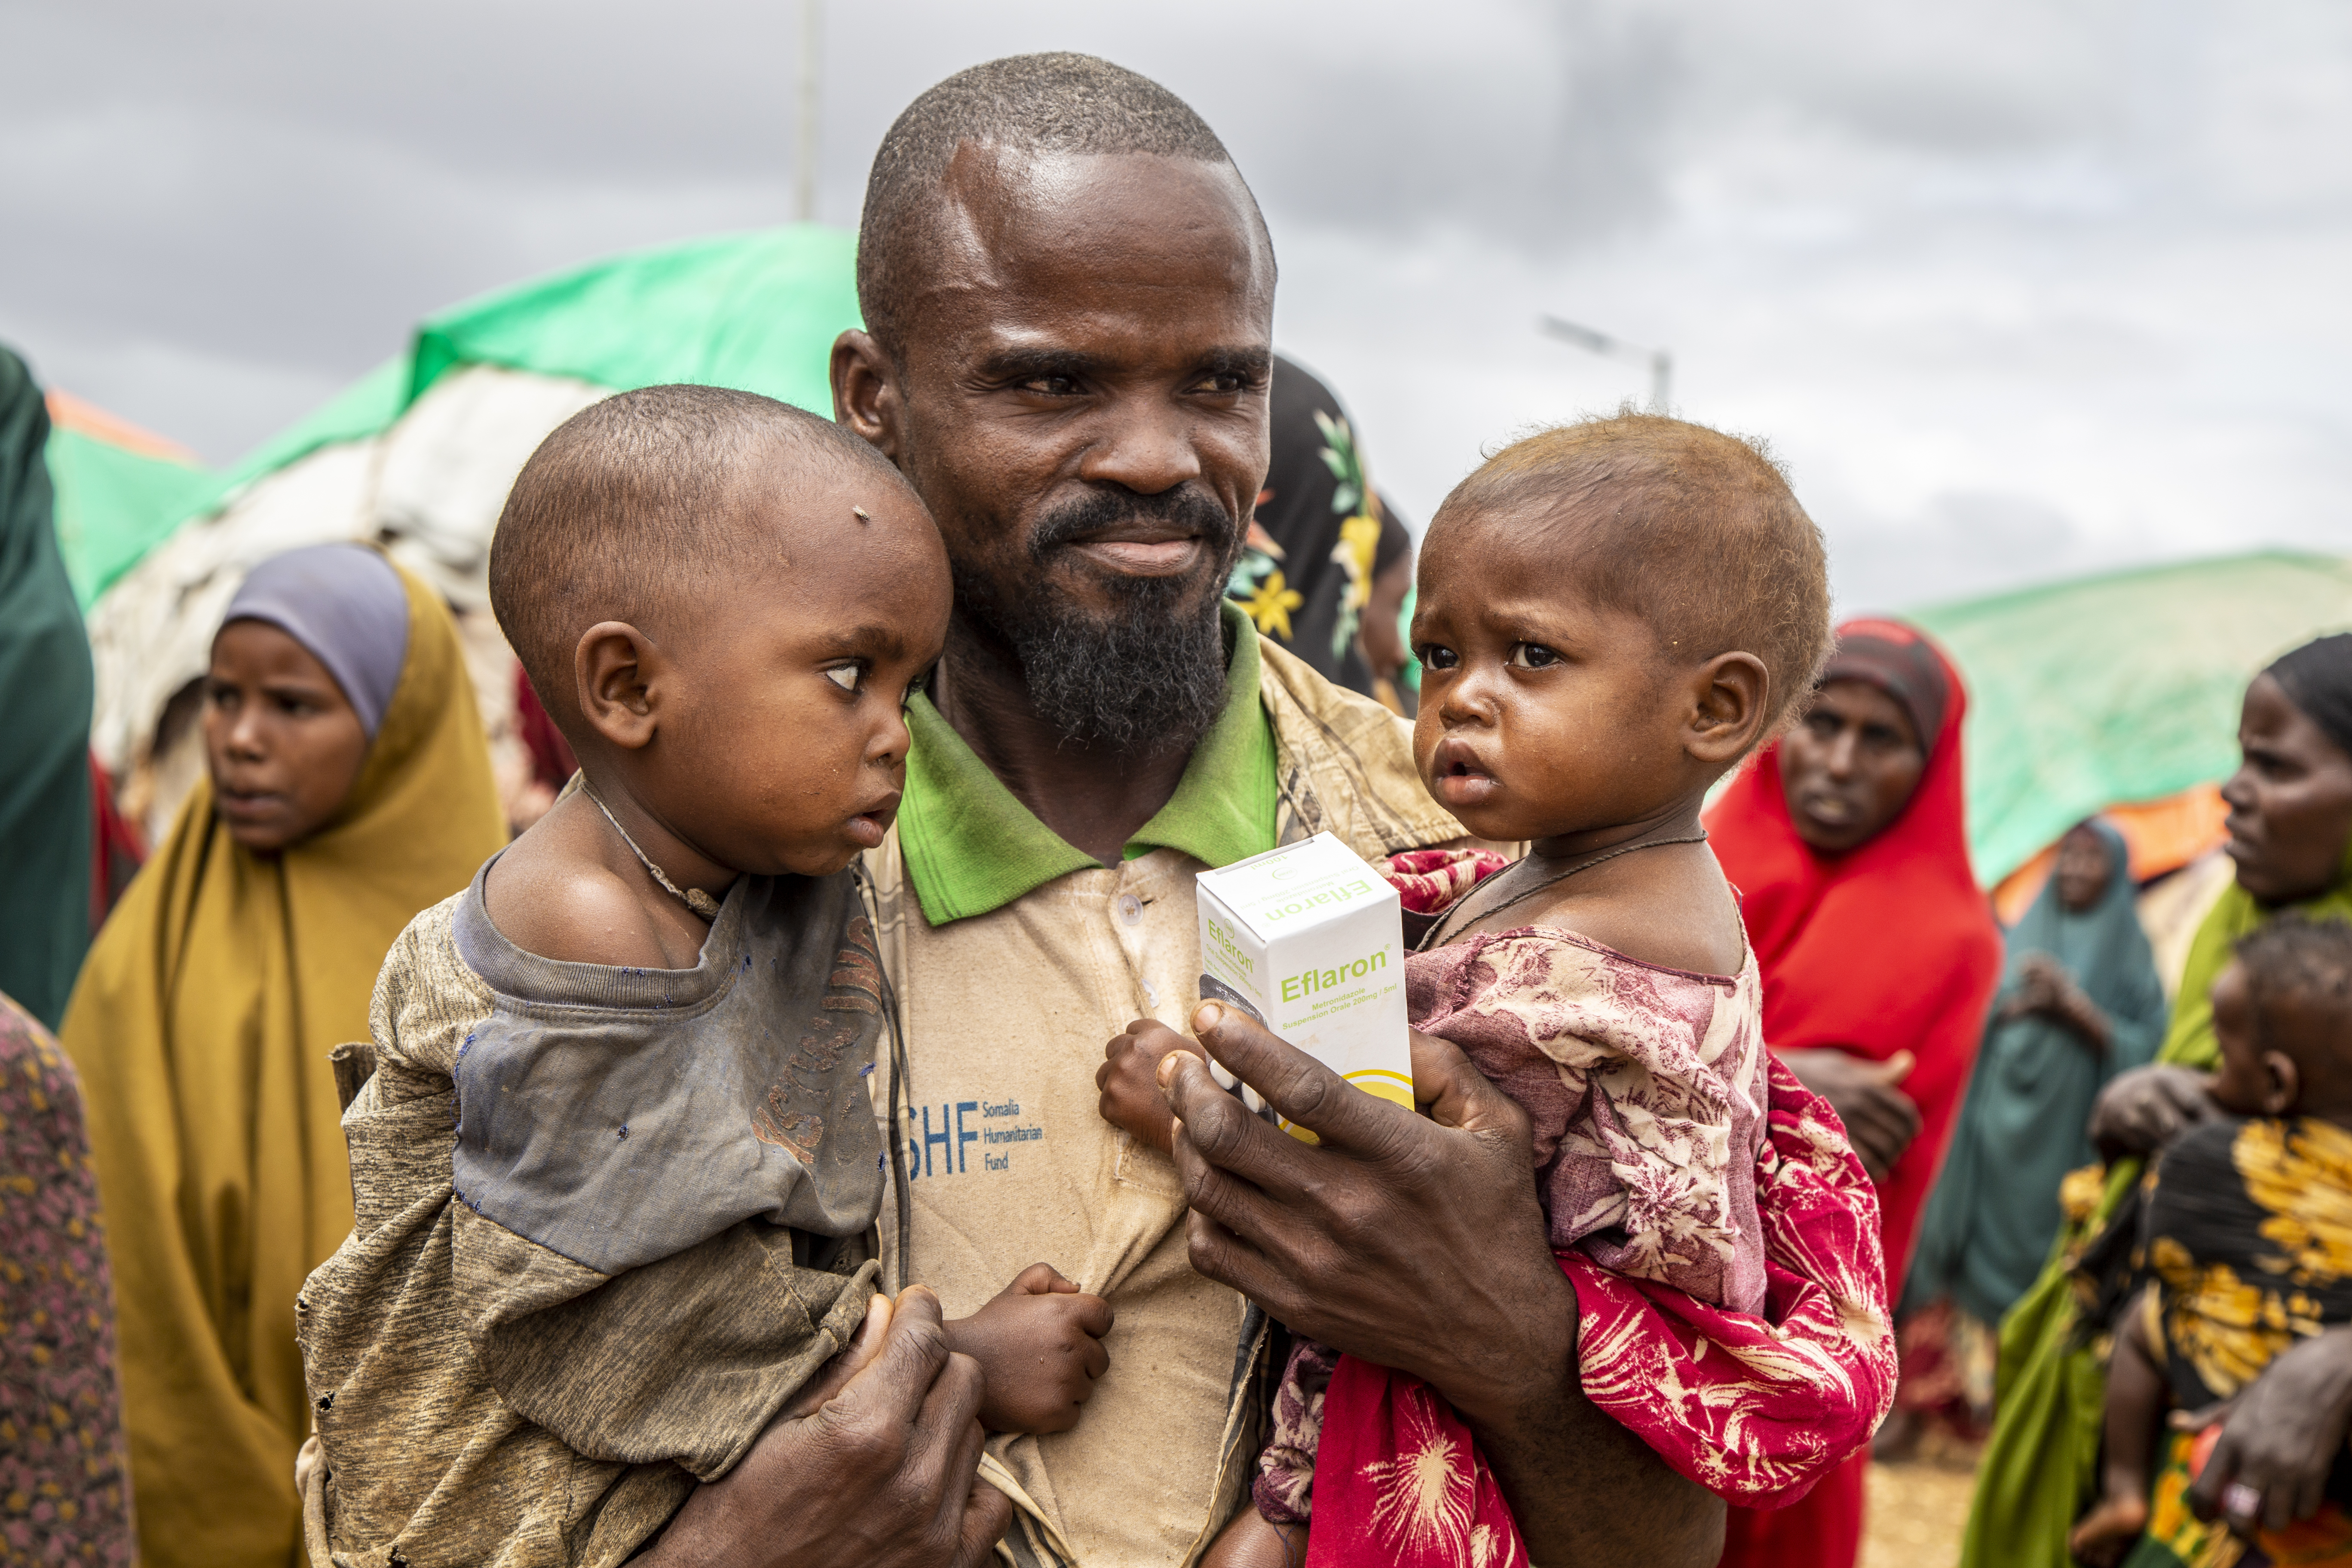 Abdi brought his two-year-old Khadija and three-year-old Hassan both suffering from Acute Watery Diarrhea (AWD). 